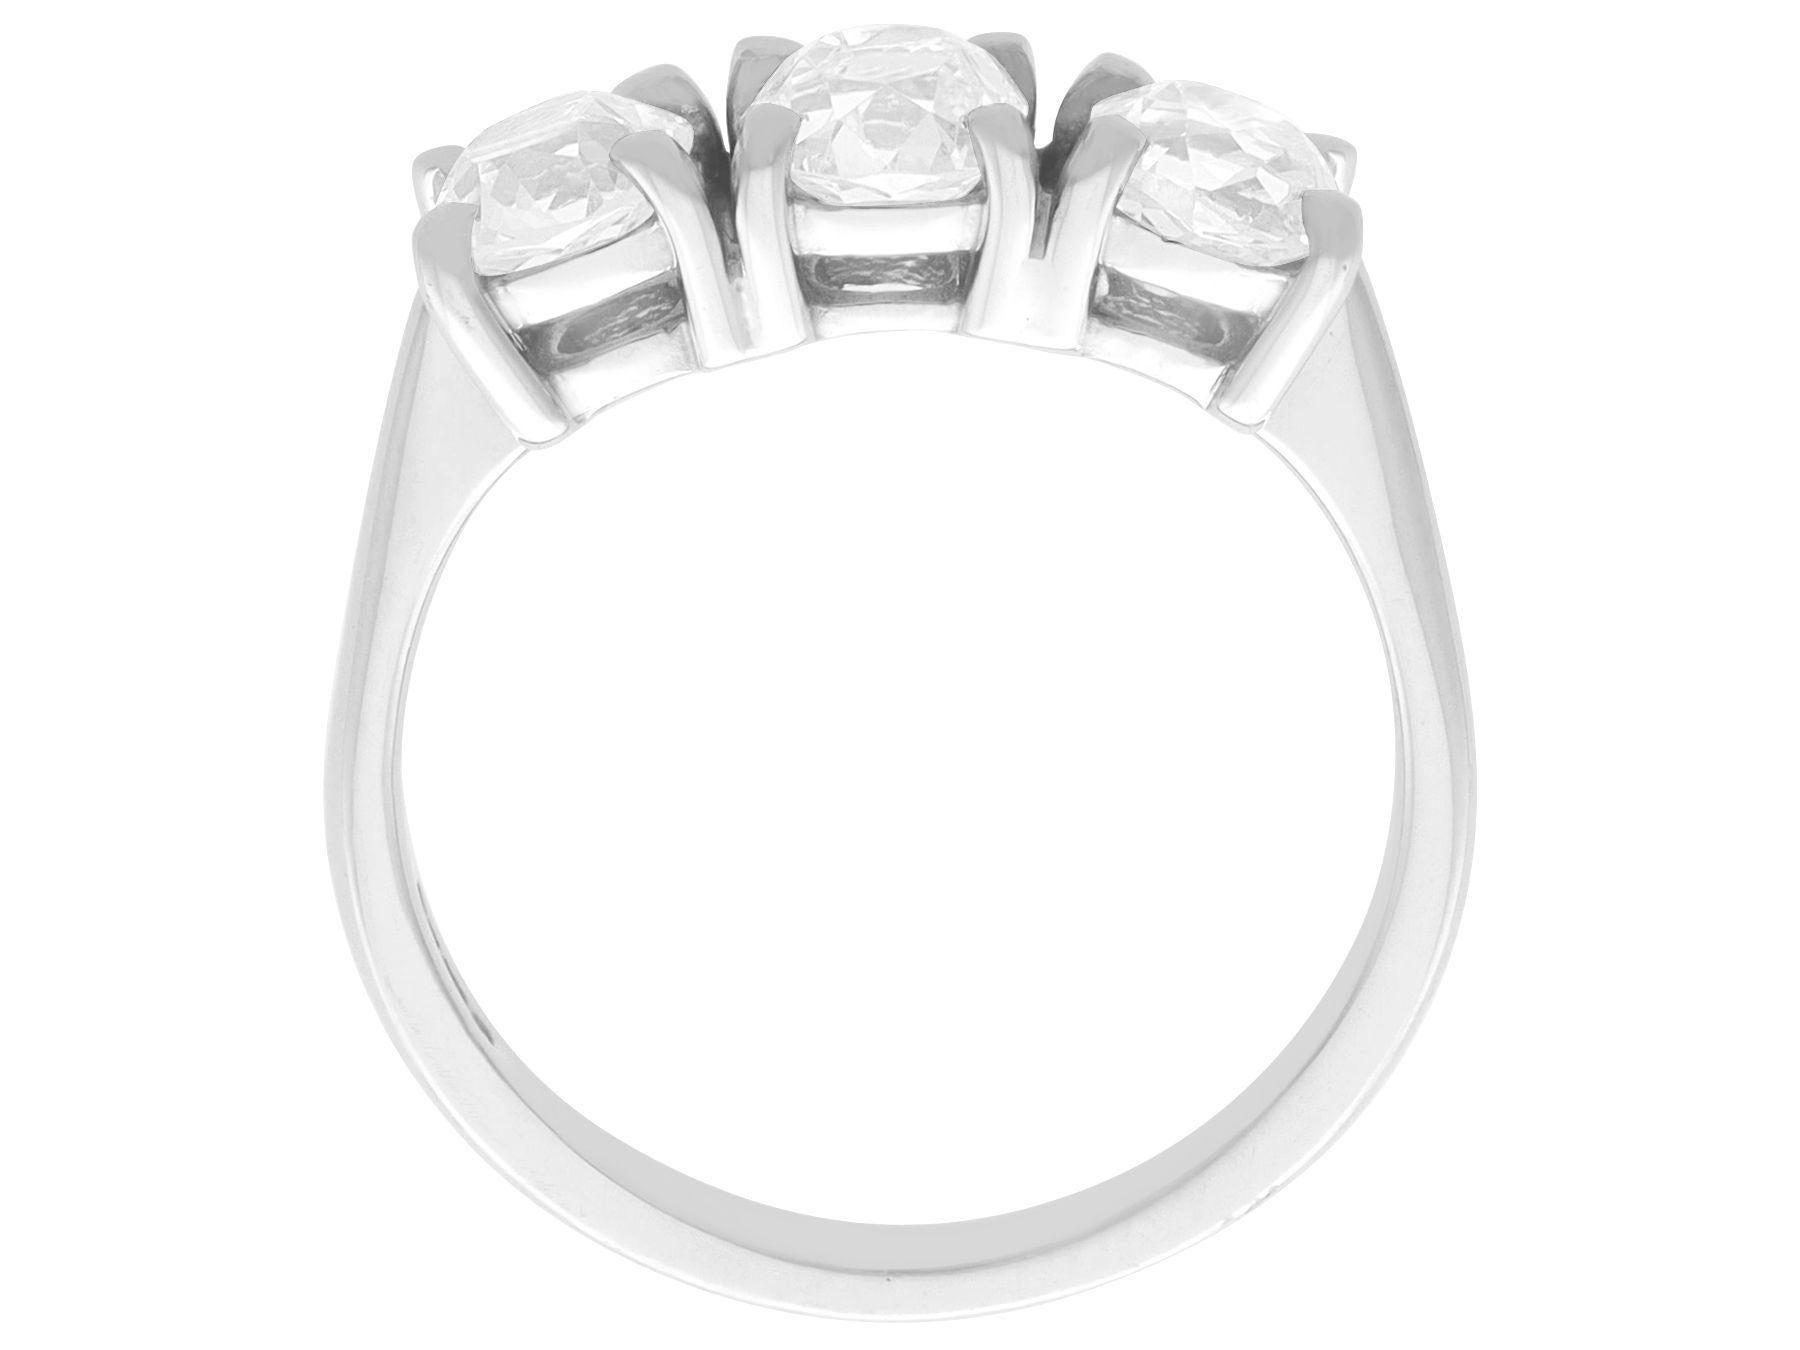 Women's or Men's Antique and Contemporary 1.73 Carat Diamond and 18k White Gold Trilogy Ring For Sale